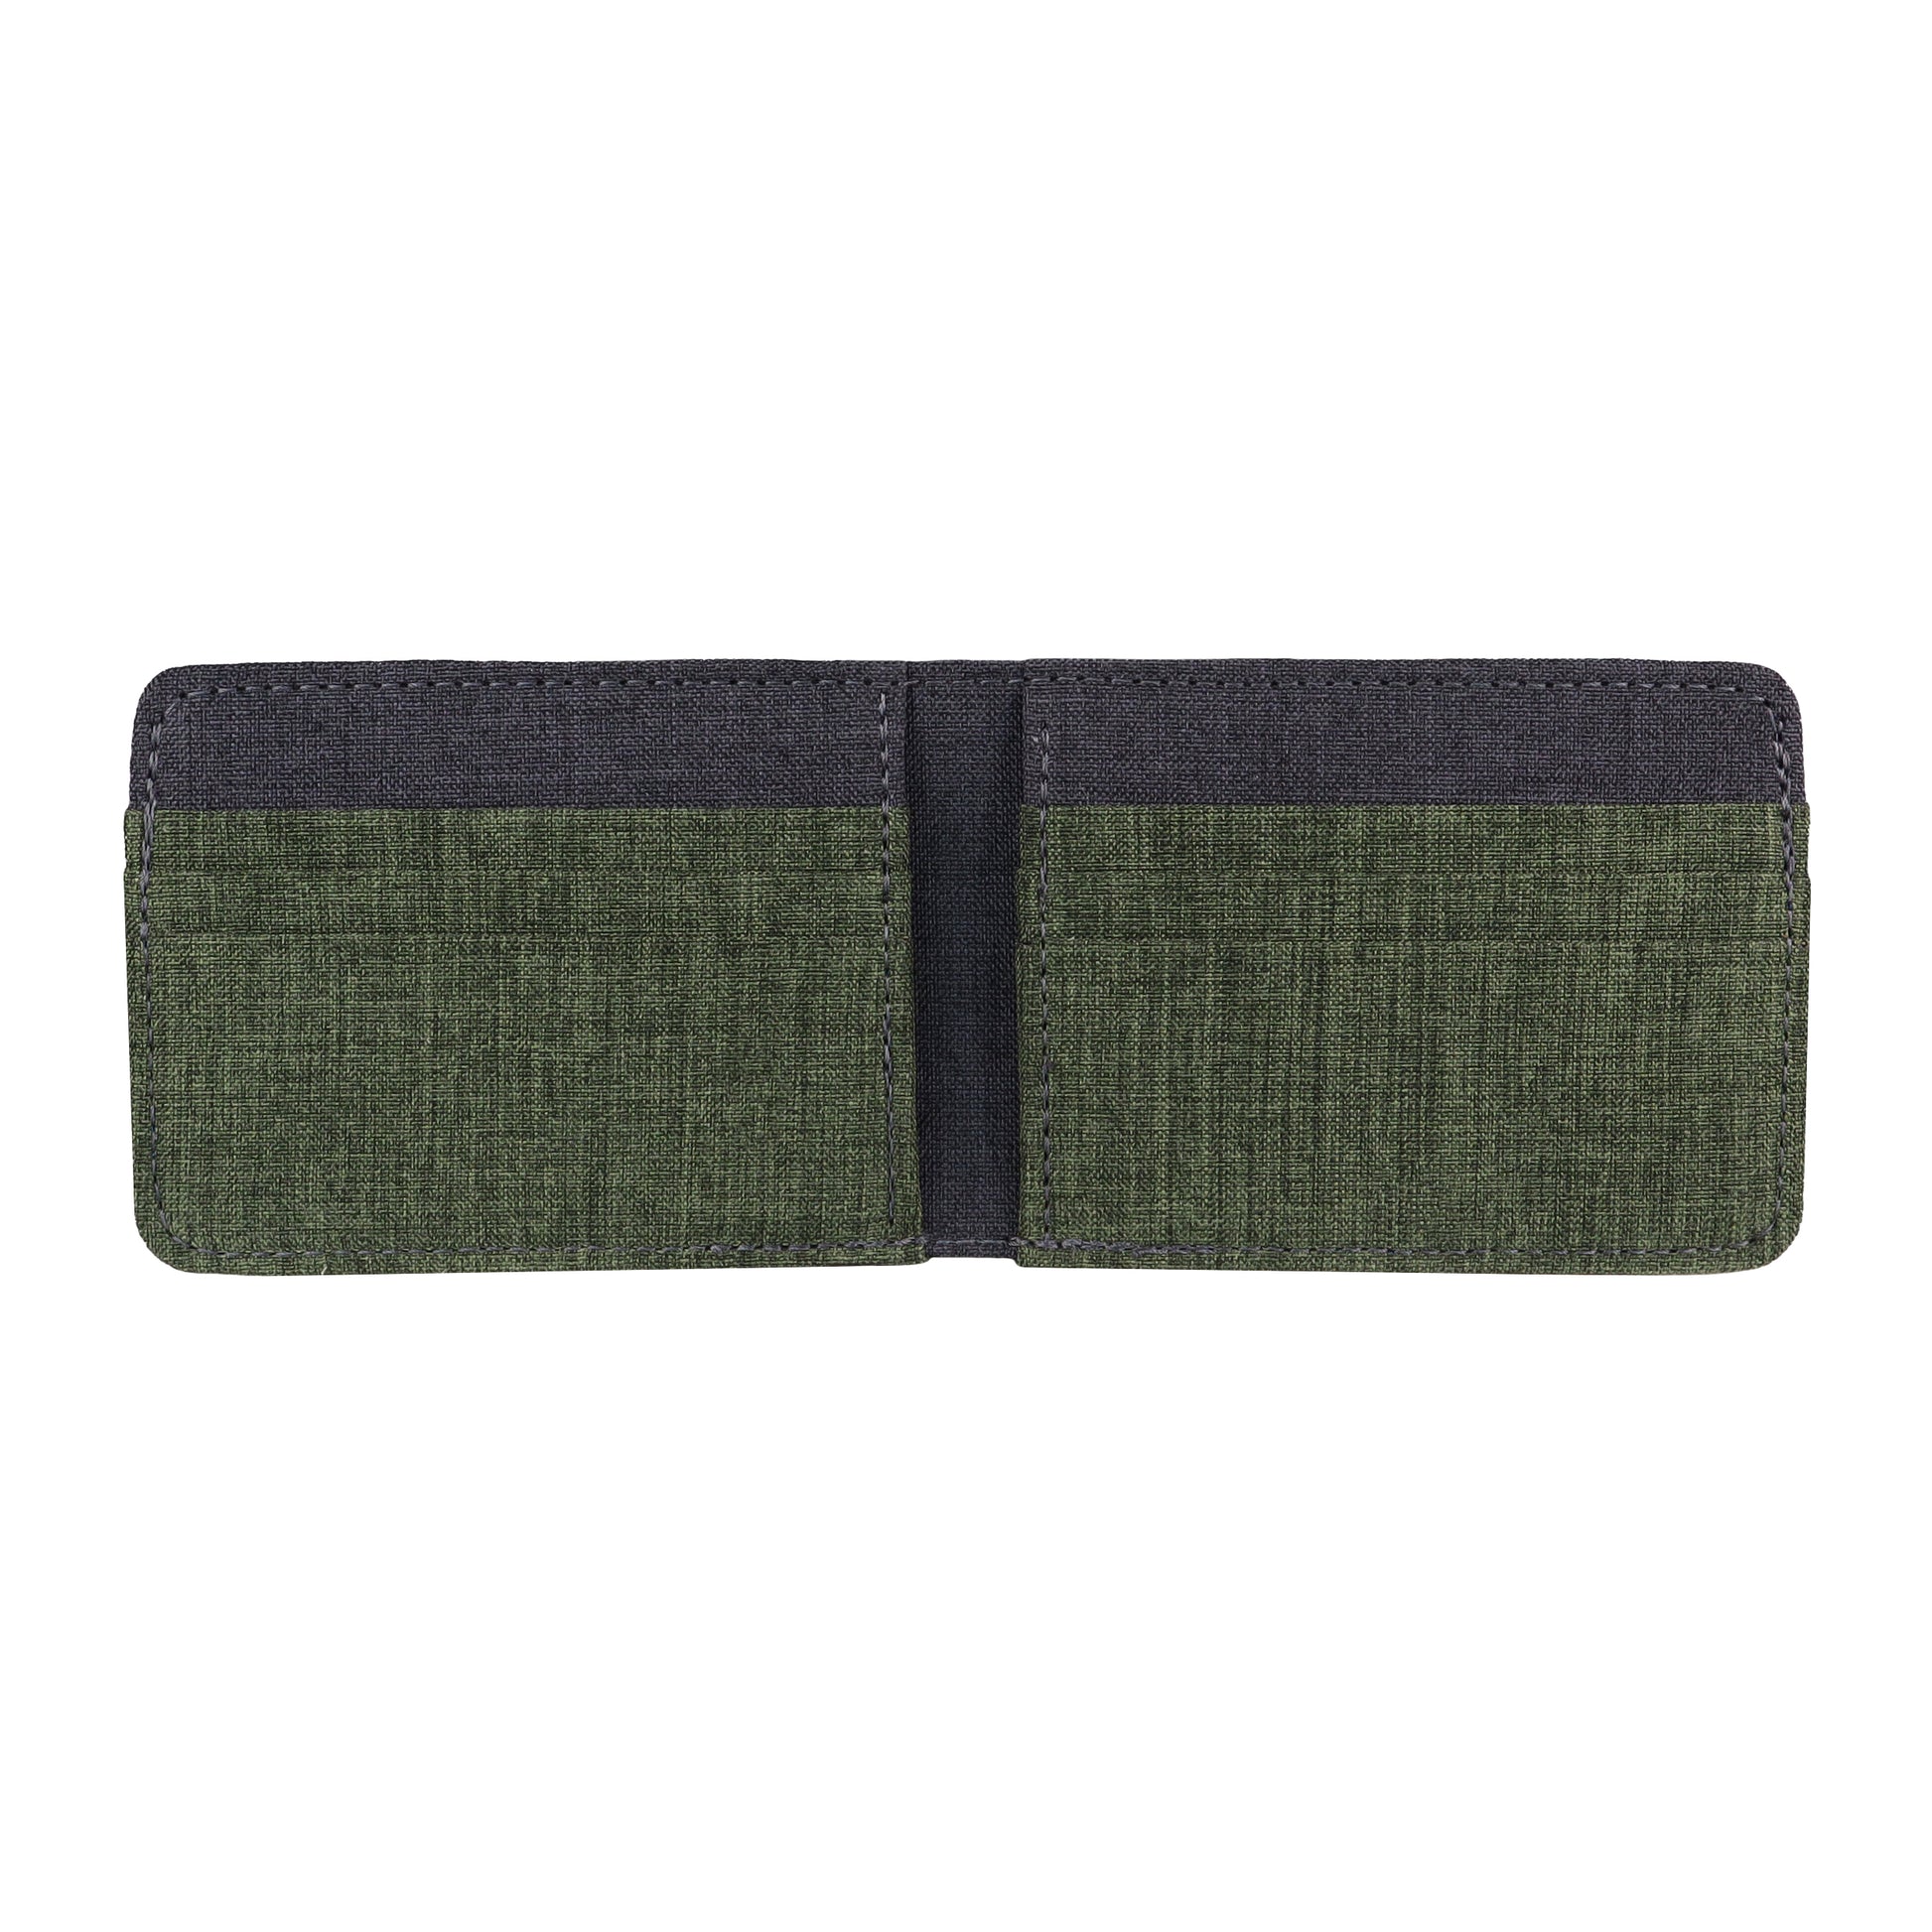 Green and Gray Fabric Bifold Wallet